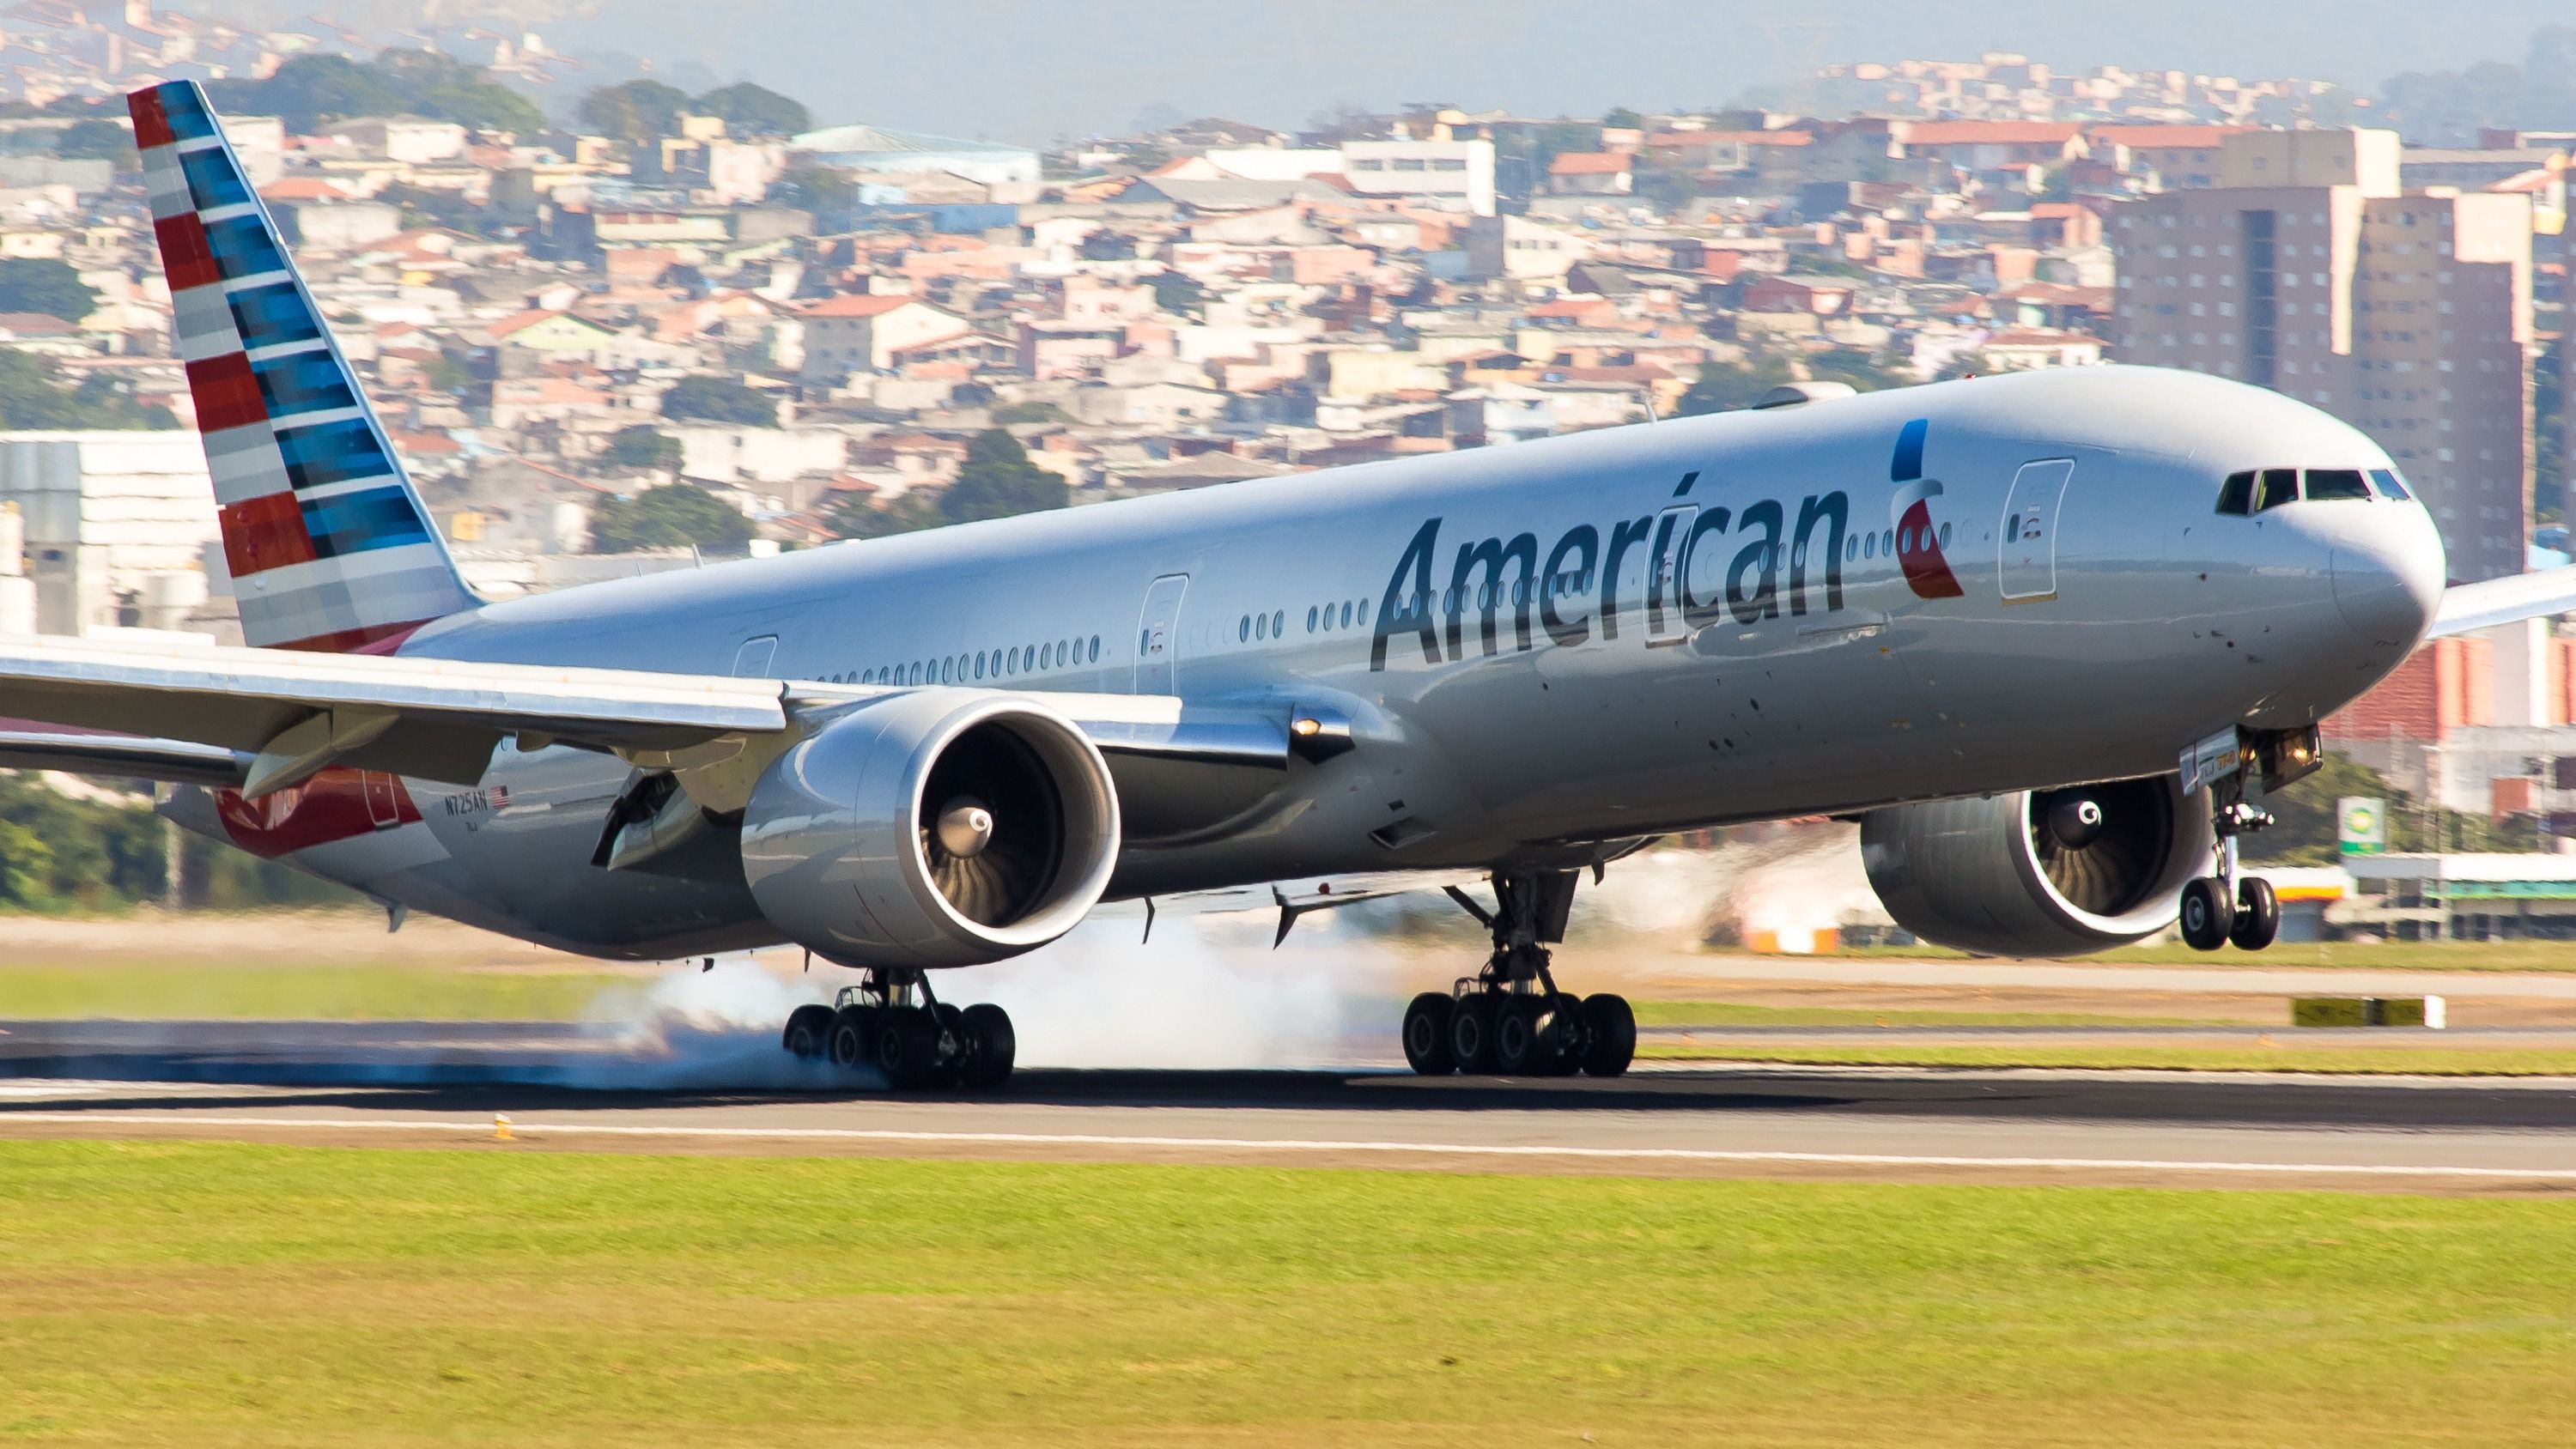 An American Airlines Boeing 777-300ER landing on a runway.